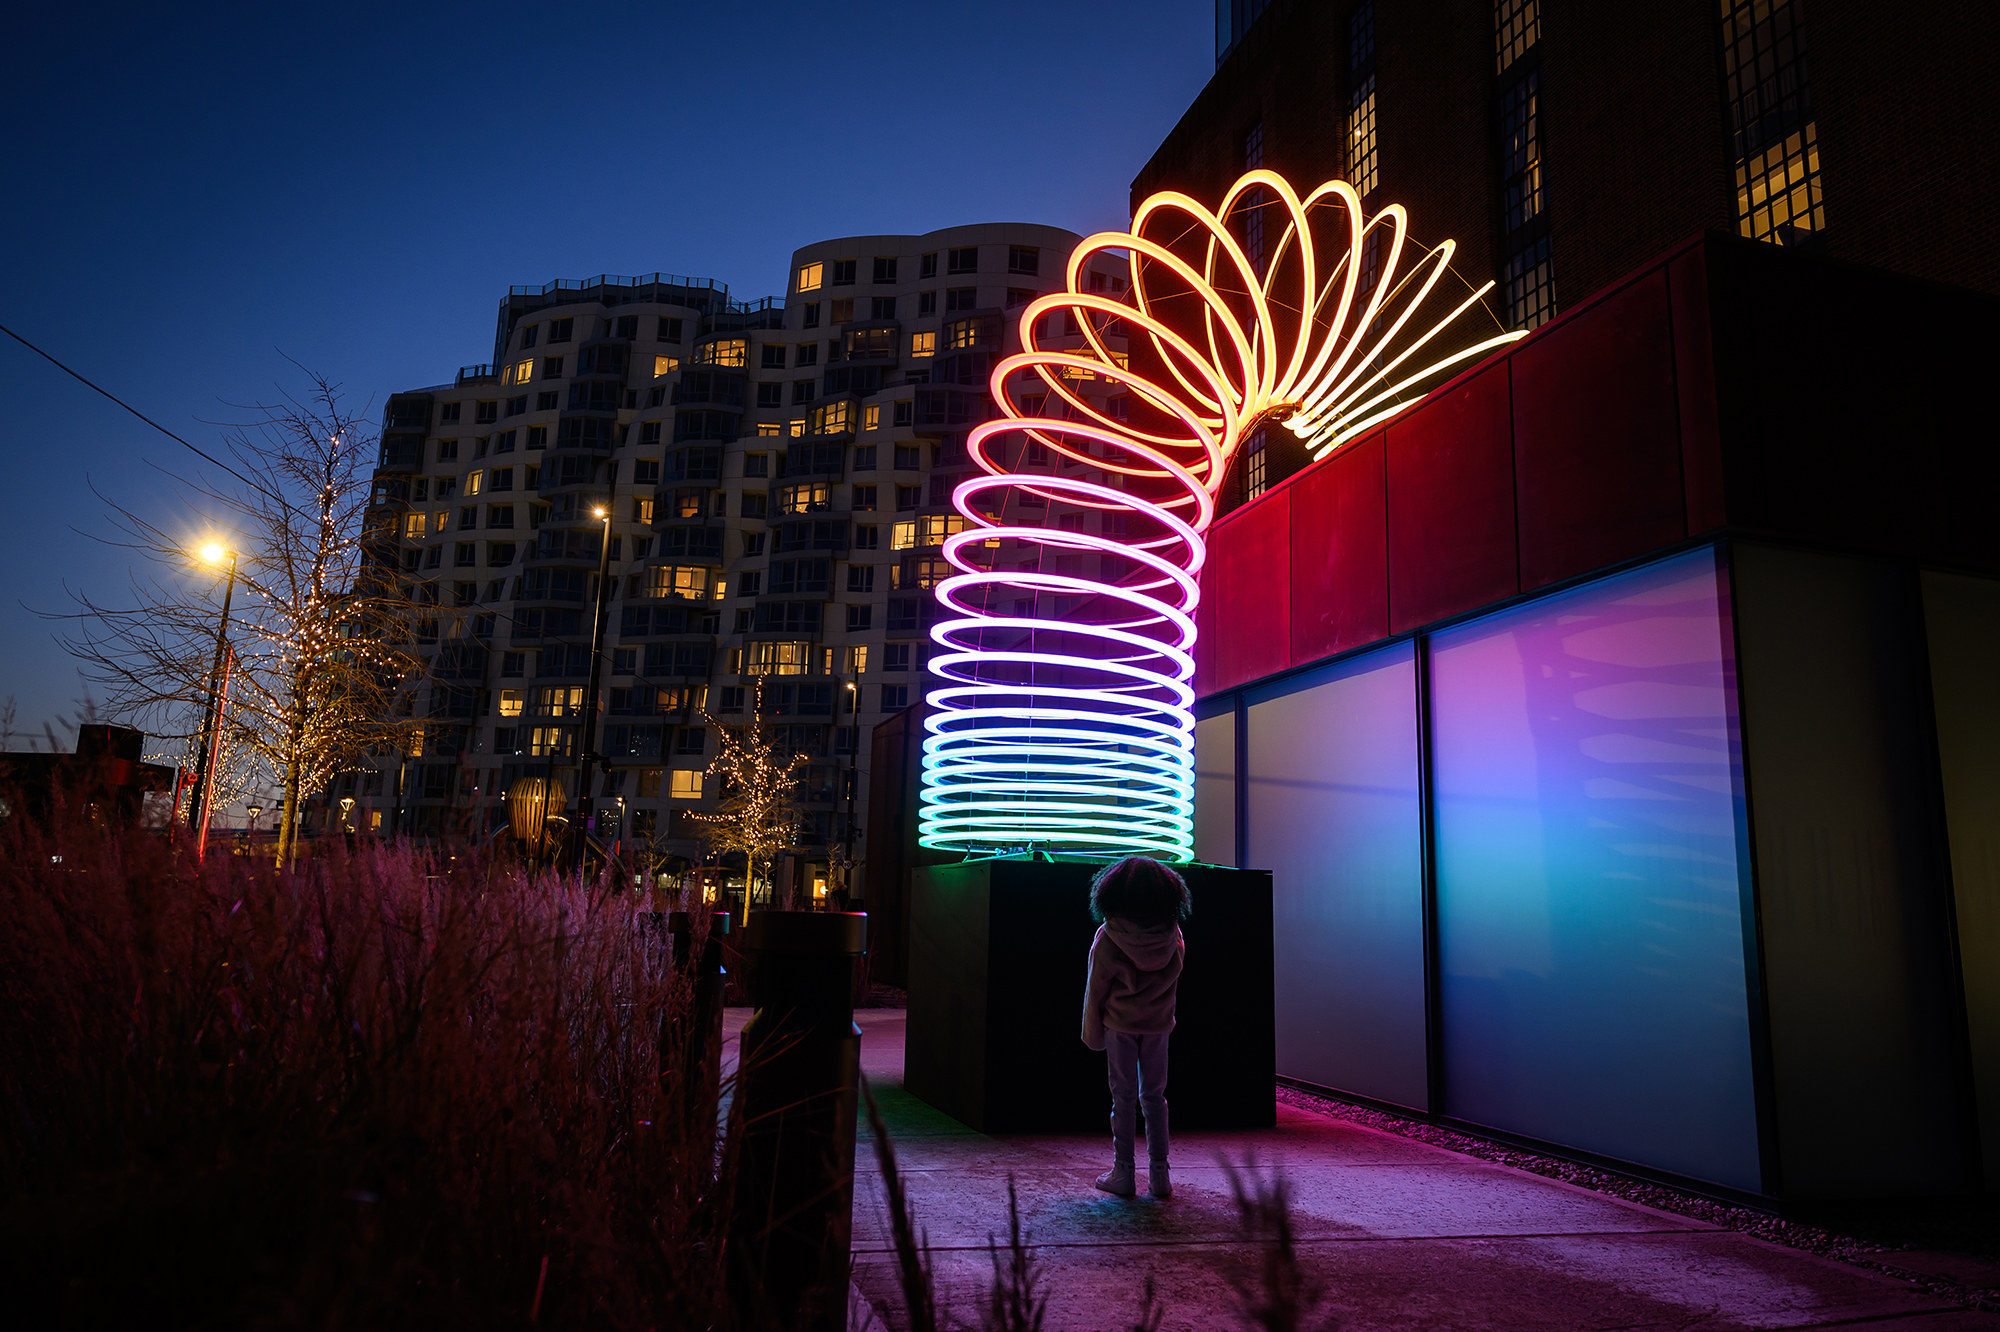 A gigantic neon slinky at night